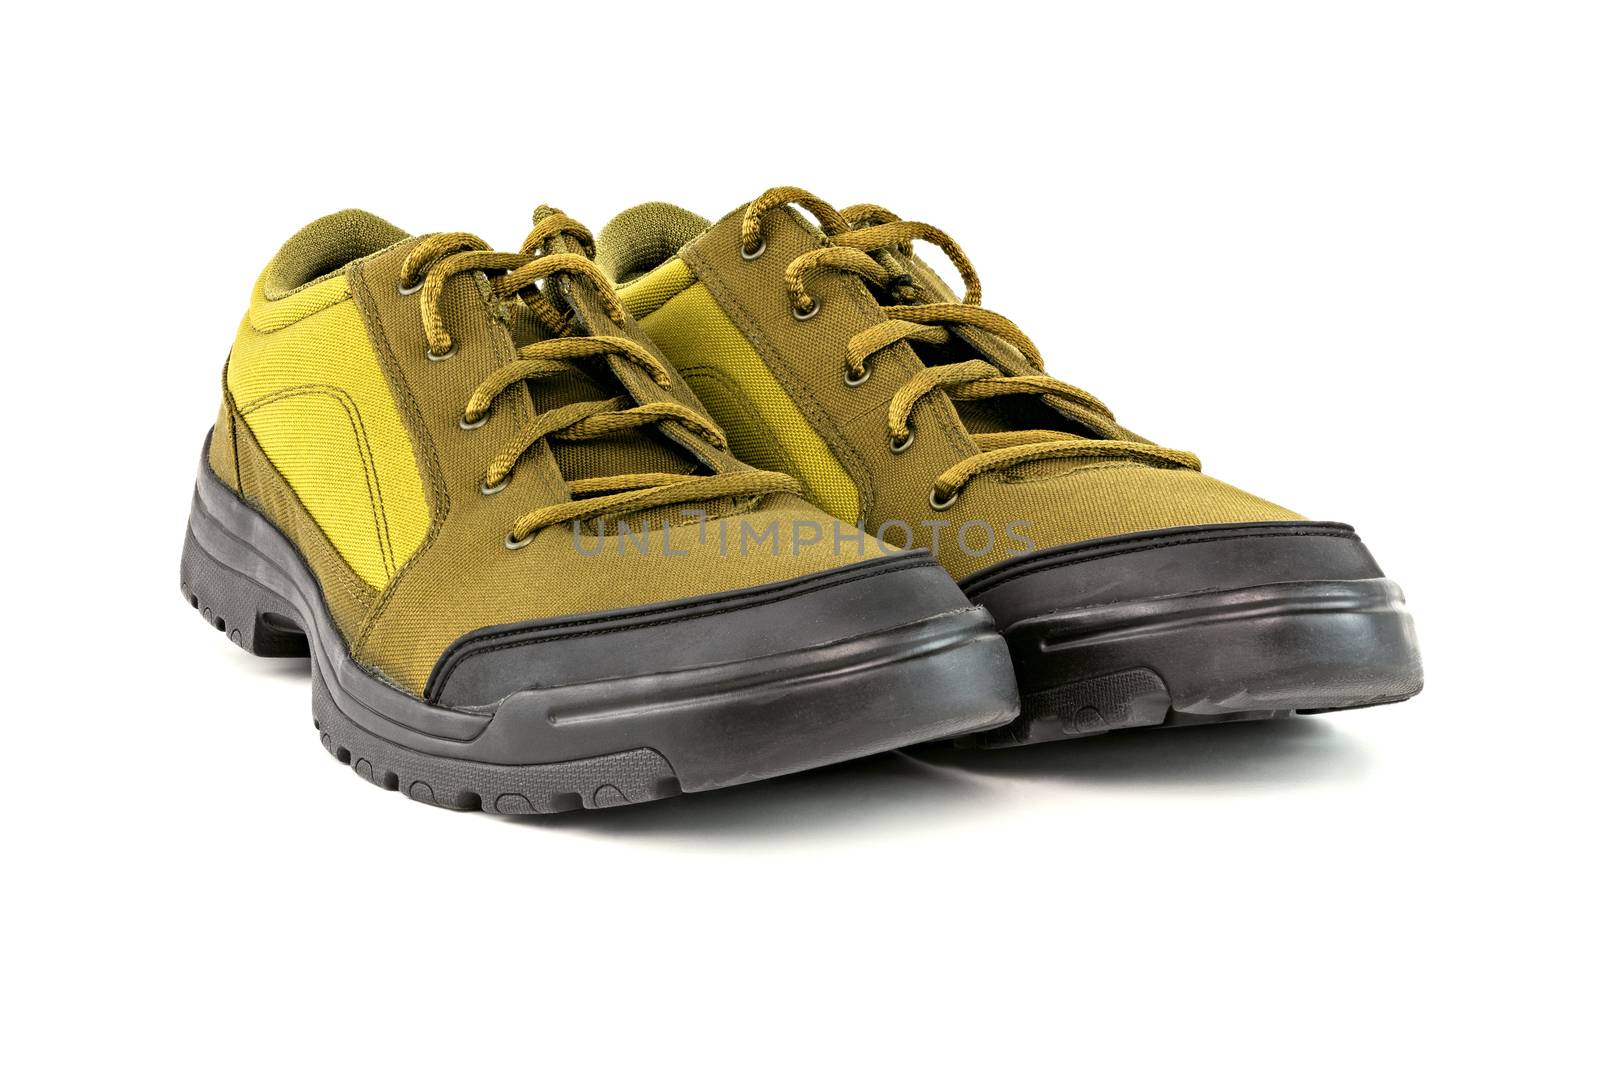 a pair of cheap yellow dense fabric fabric hiking or hunting shoe isolated on white background.